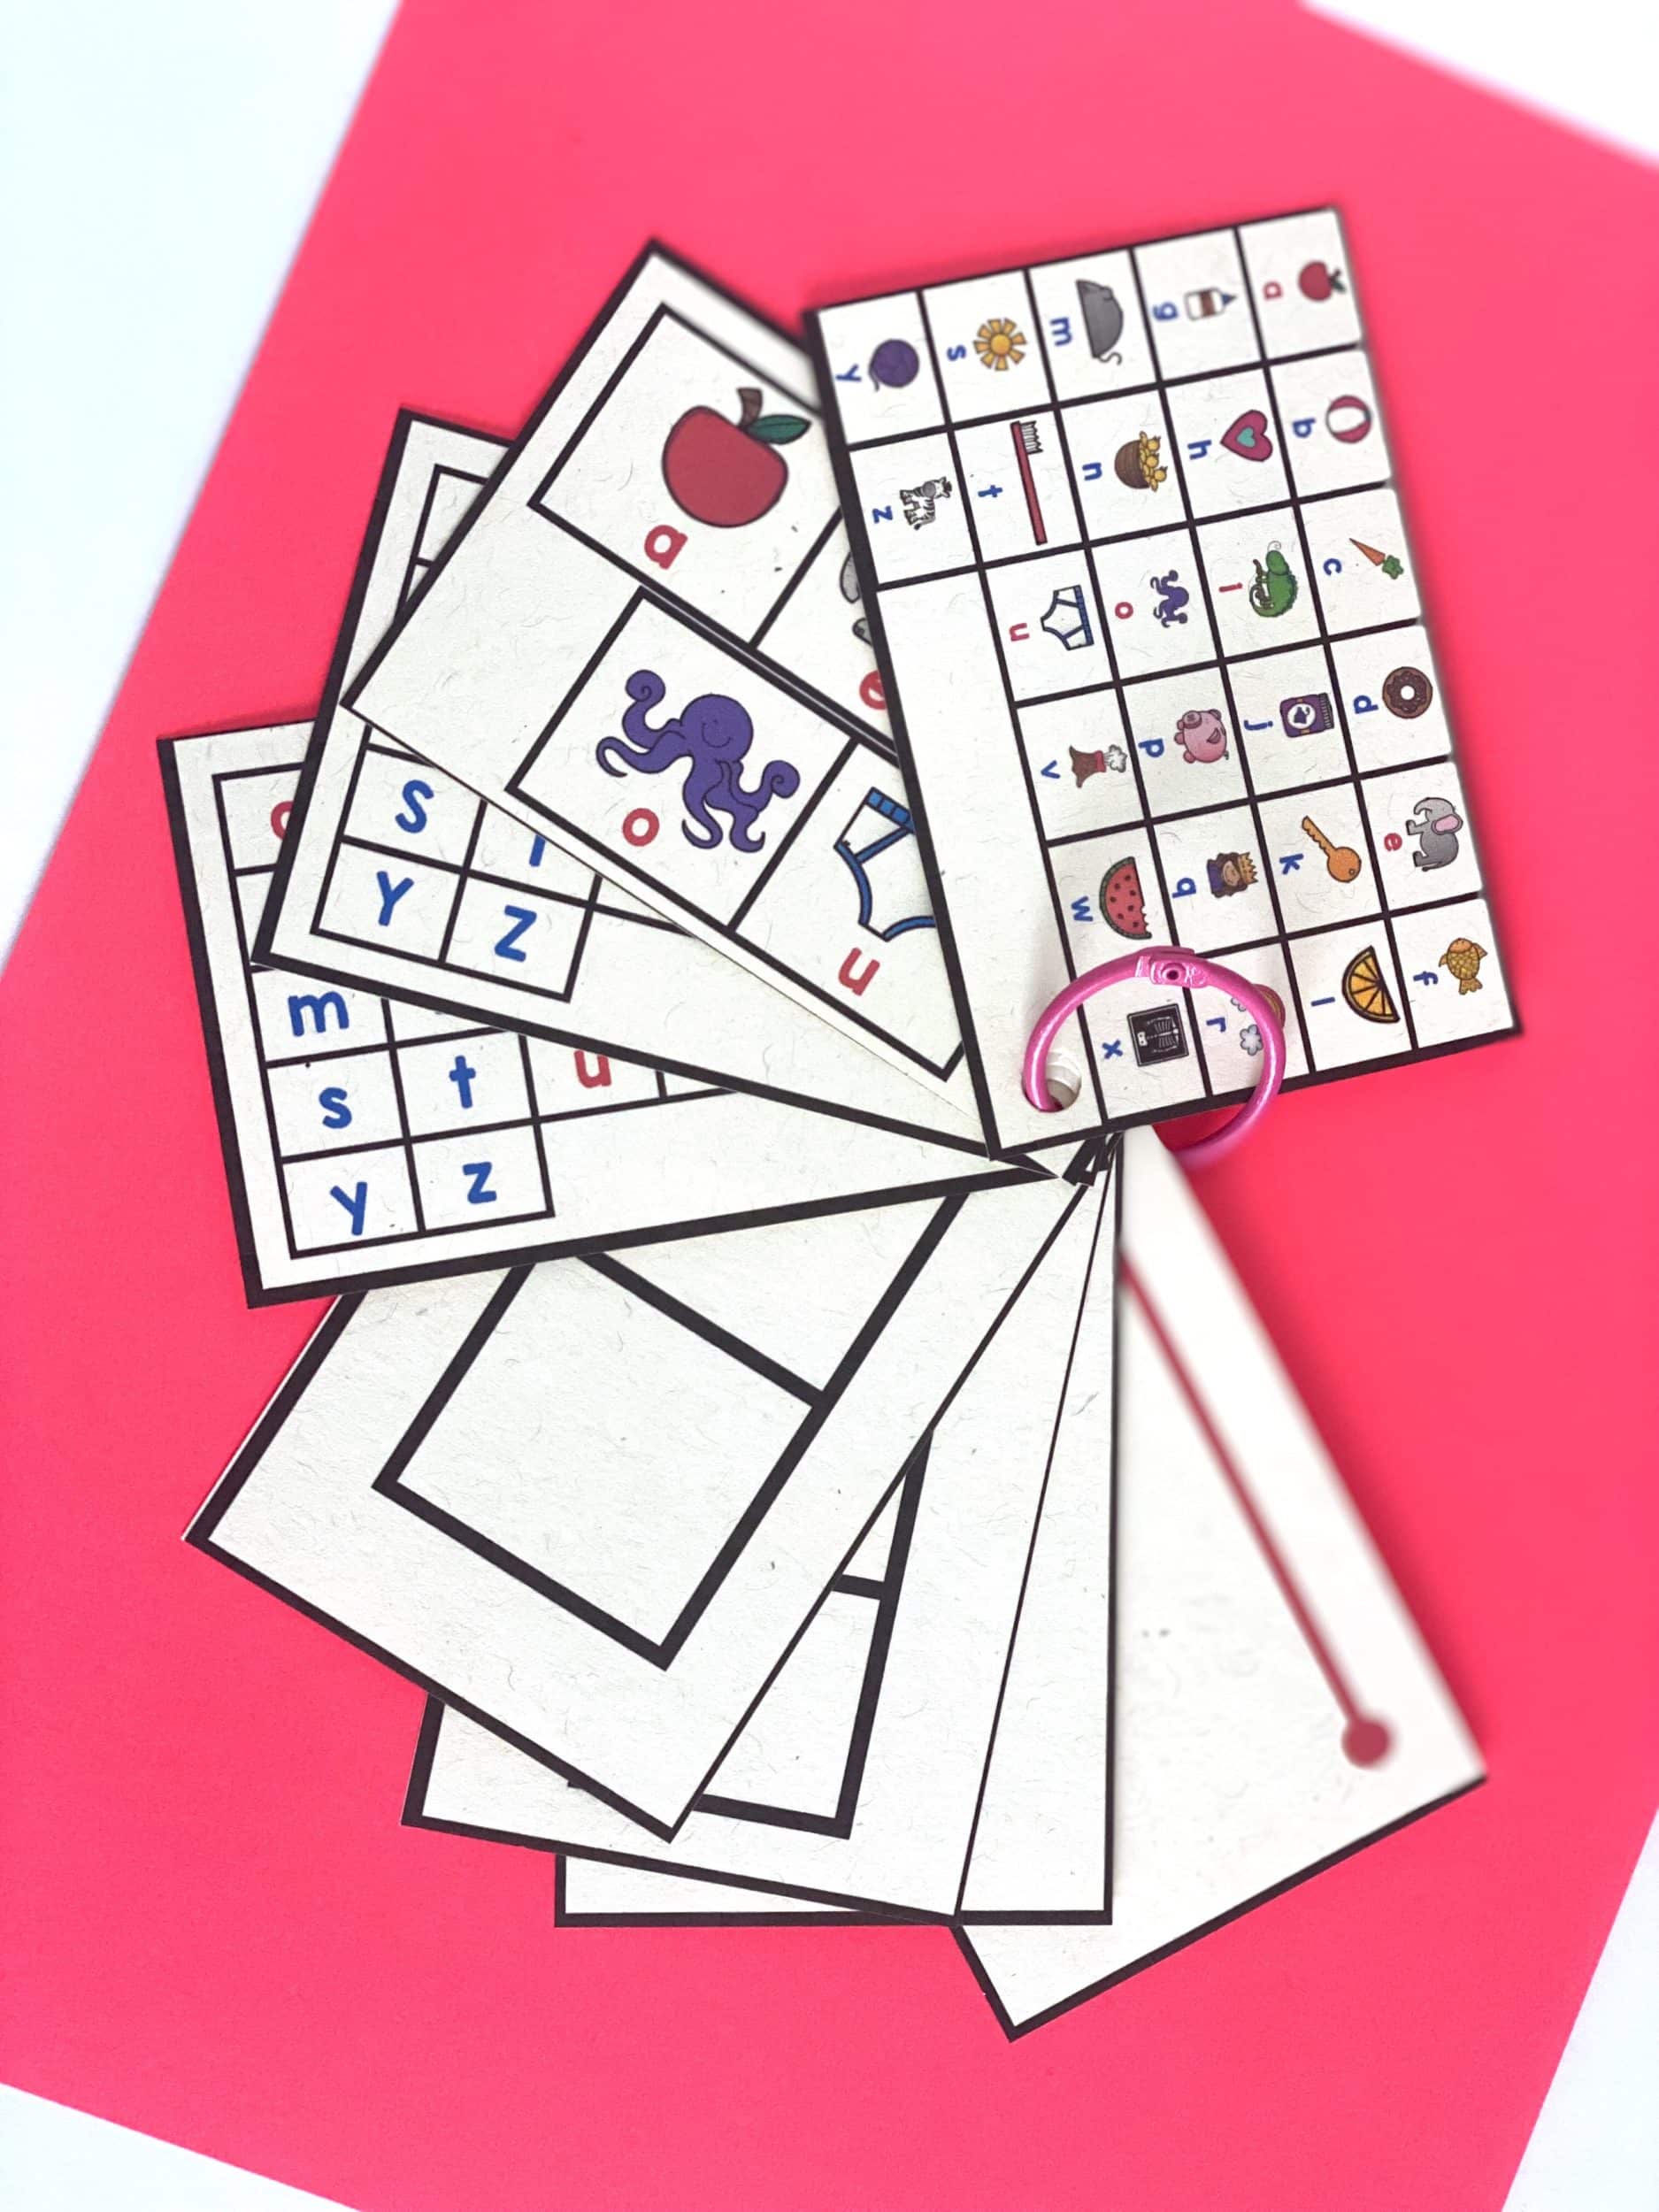 Enjoy this FREE Word Work Toolkit Guide for Literacy Centers and Activities! This easy-to-read visual guide will help you create a toolkit for your kindergarten and first grade students. It is easy to assemble, inexpensive, and will save valuable time! Read on to learn more and get your FREE download!